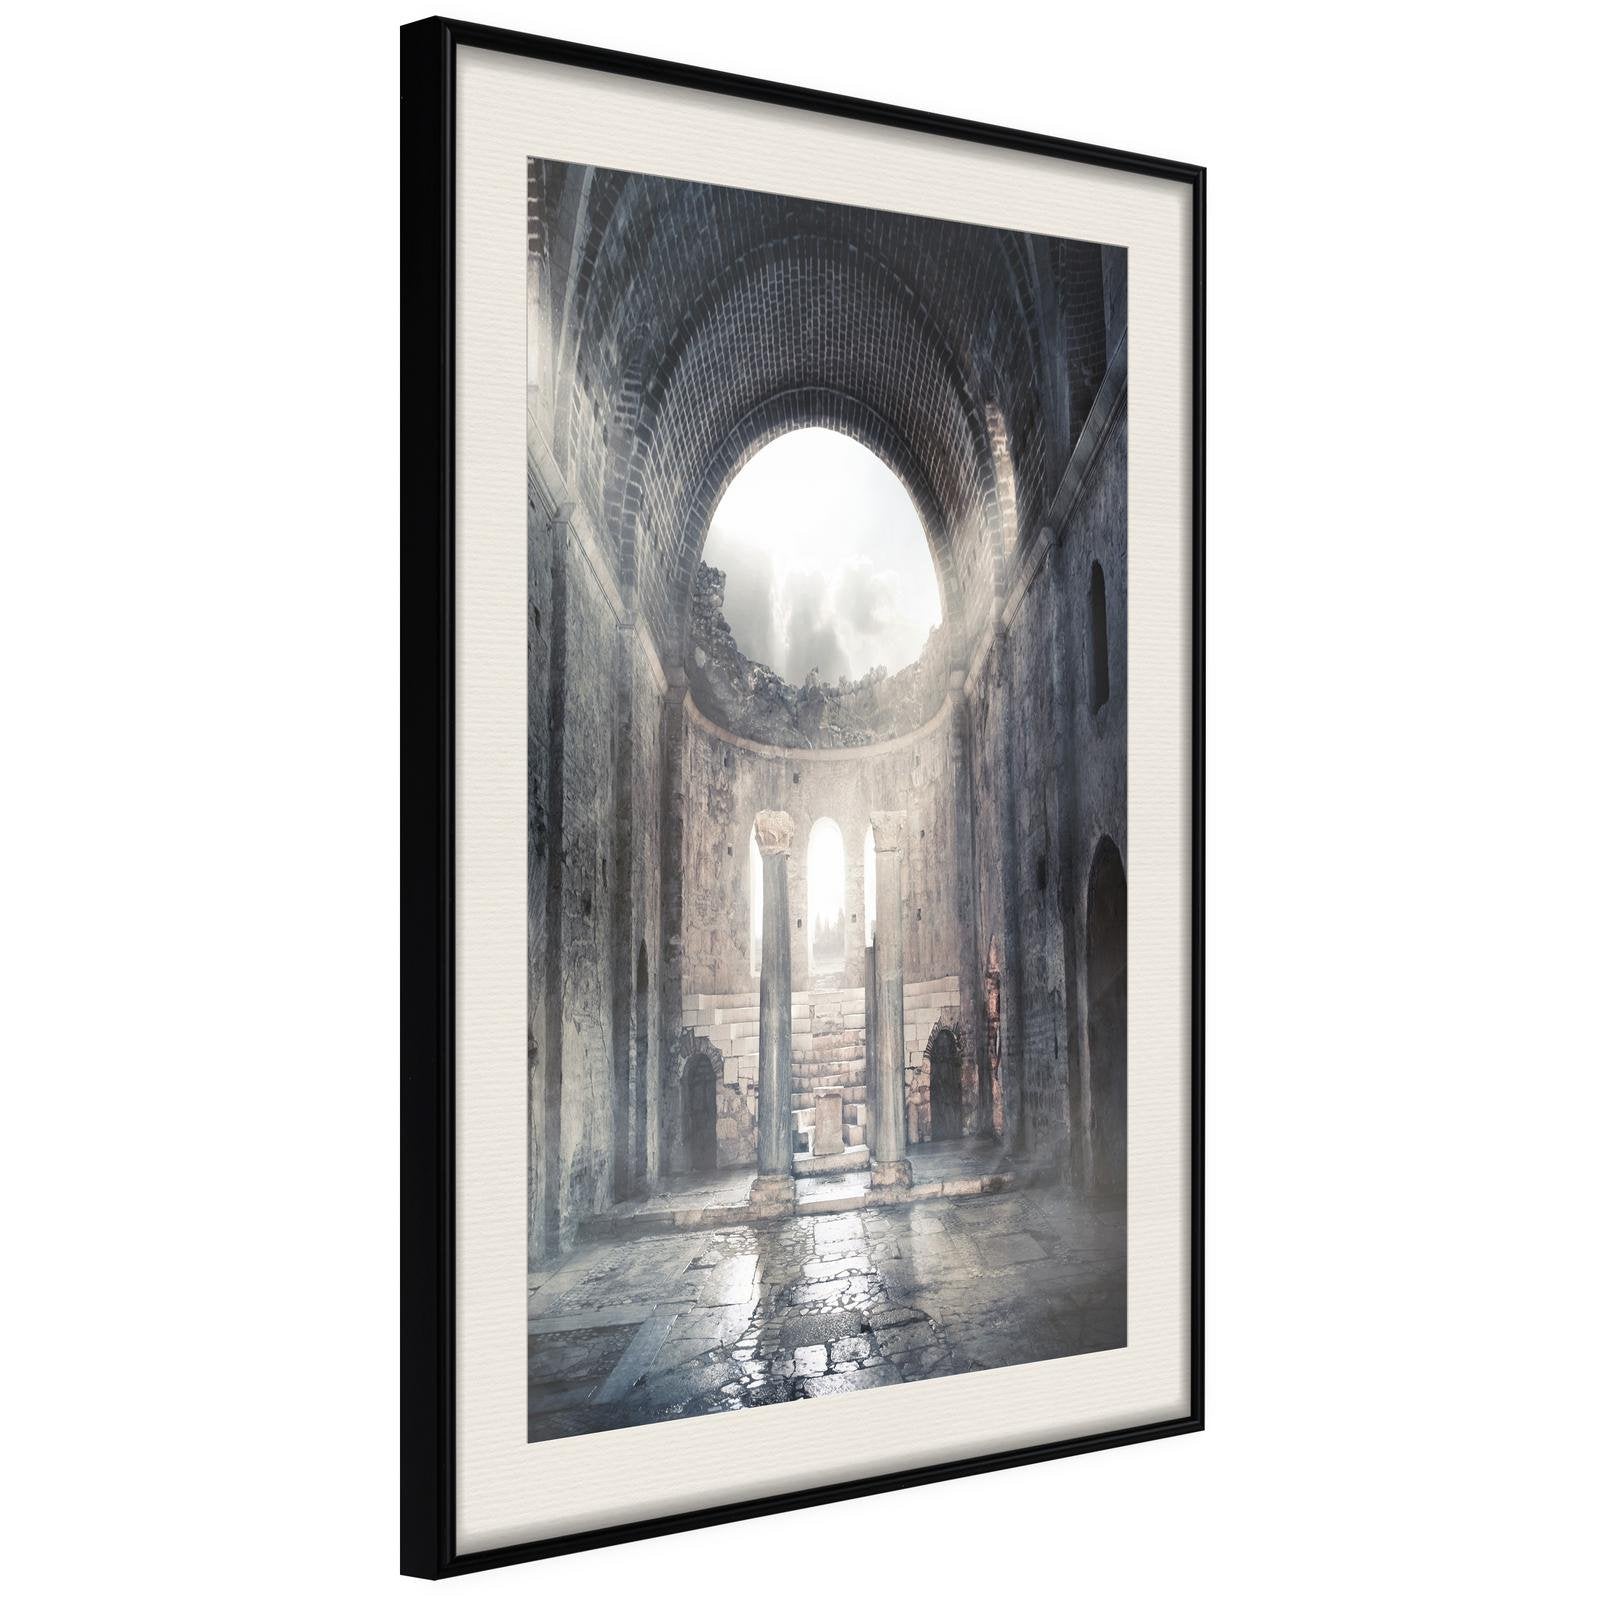 Inramad Poster / Tavla - Ruins of a Cathedral-Poster Inramad-Artgeist-20x30-Svart ram med passepartout-peaceofhome.se